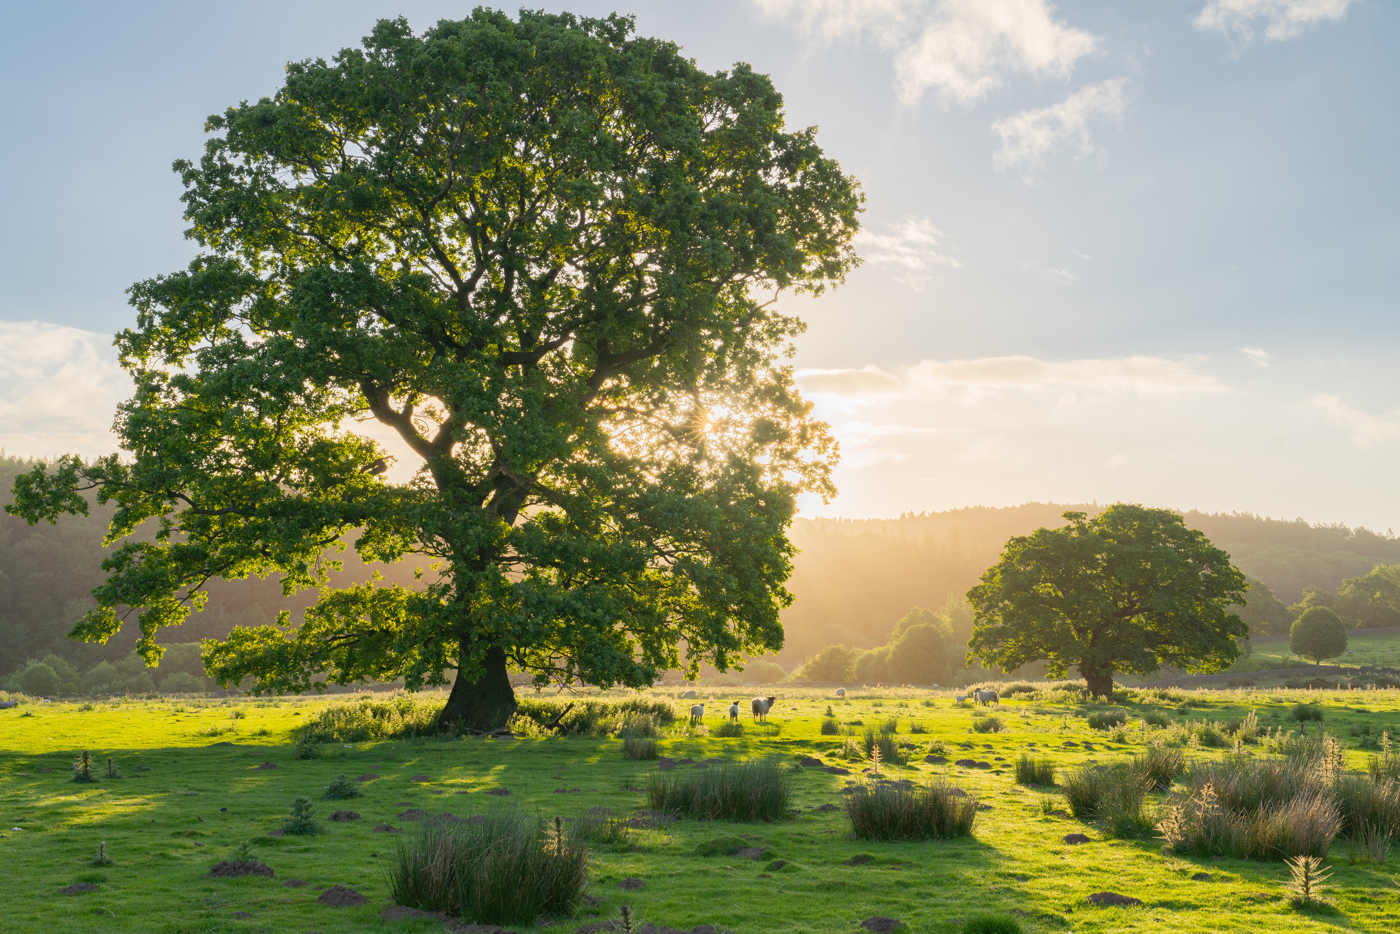 In North Yorkshire, a majestic, solitary oak tree bathed in the golden light of the setting sun dominates the frame. It stands in a lush, green field dotted with grazing sheep. Rolling hills and woodlands in the background complete the serene, picturesque landscape. a herd of sheep grazing on a lush green field